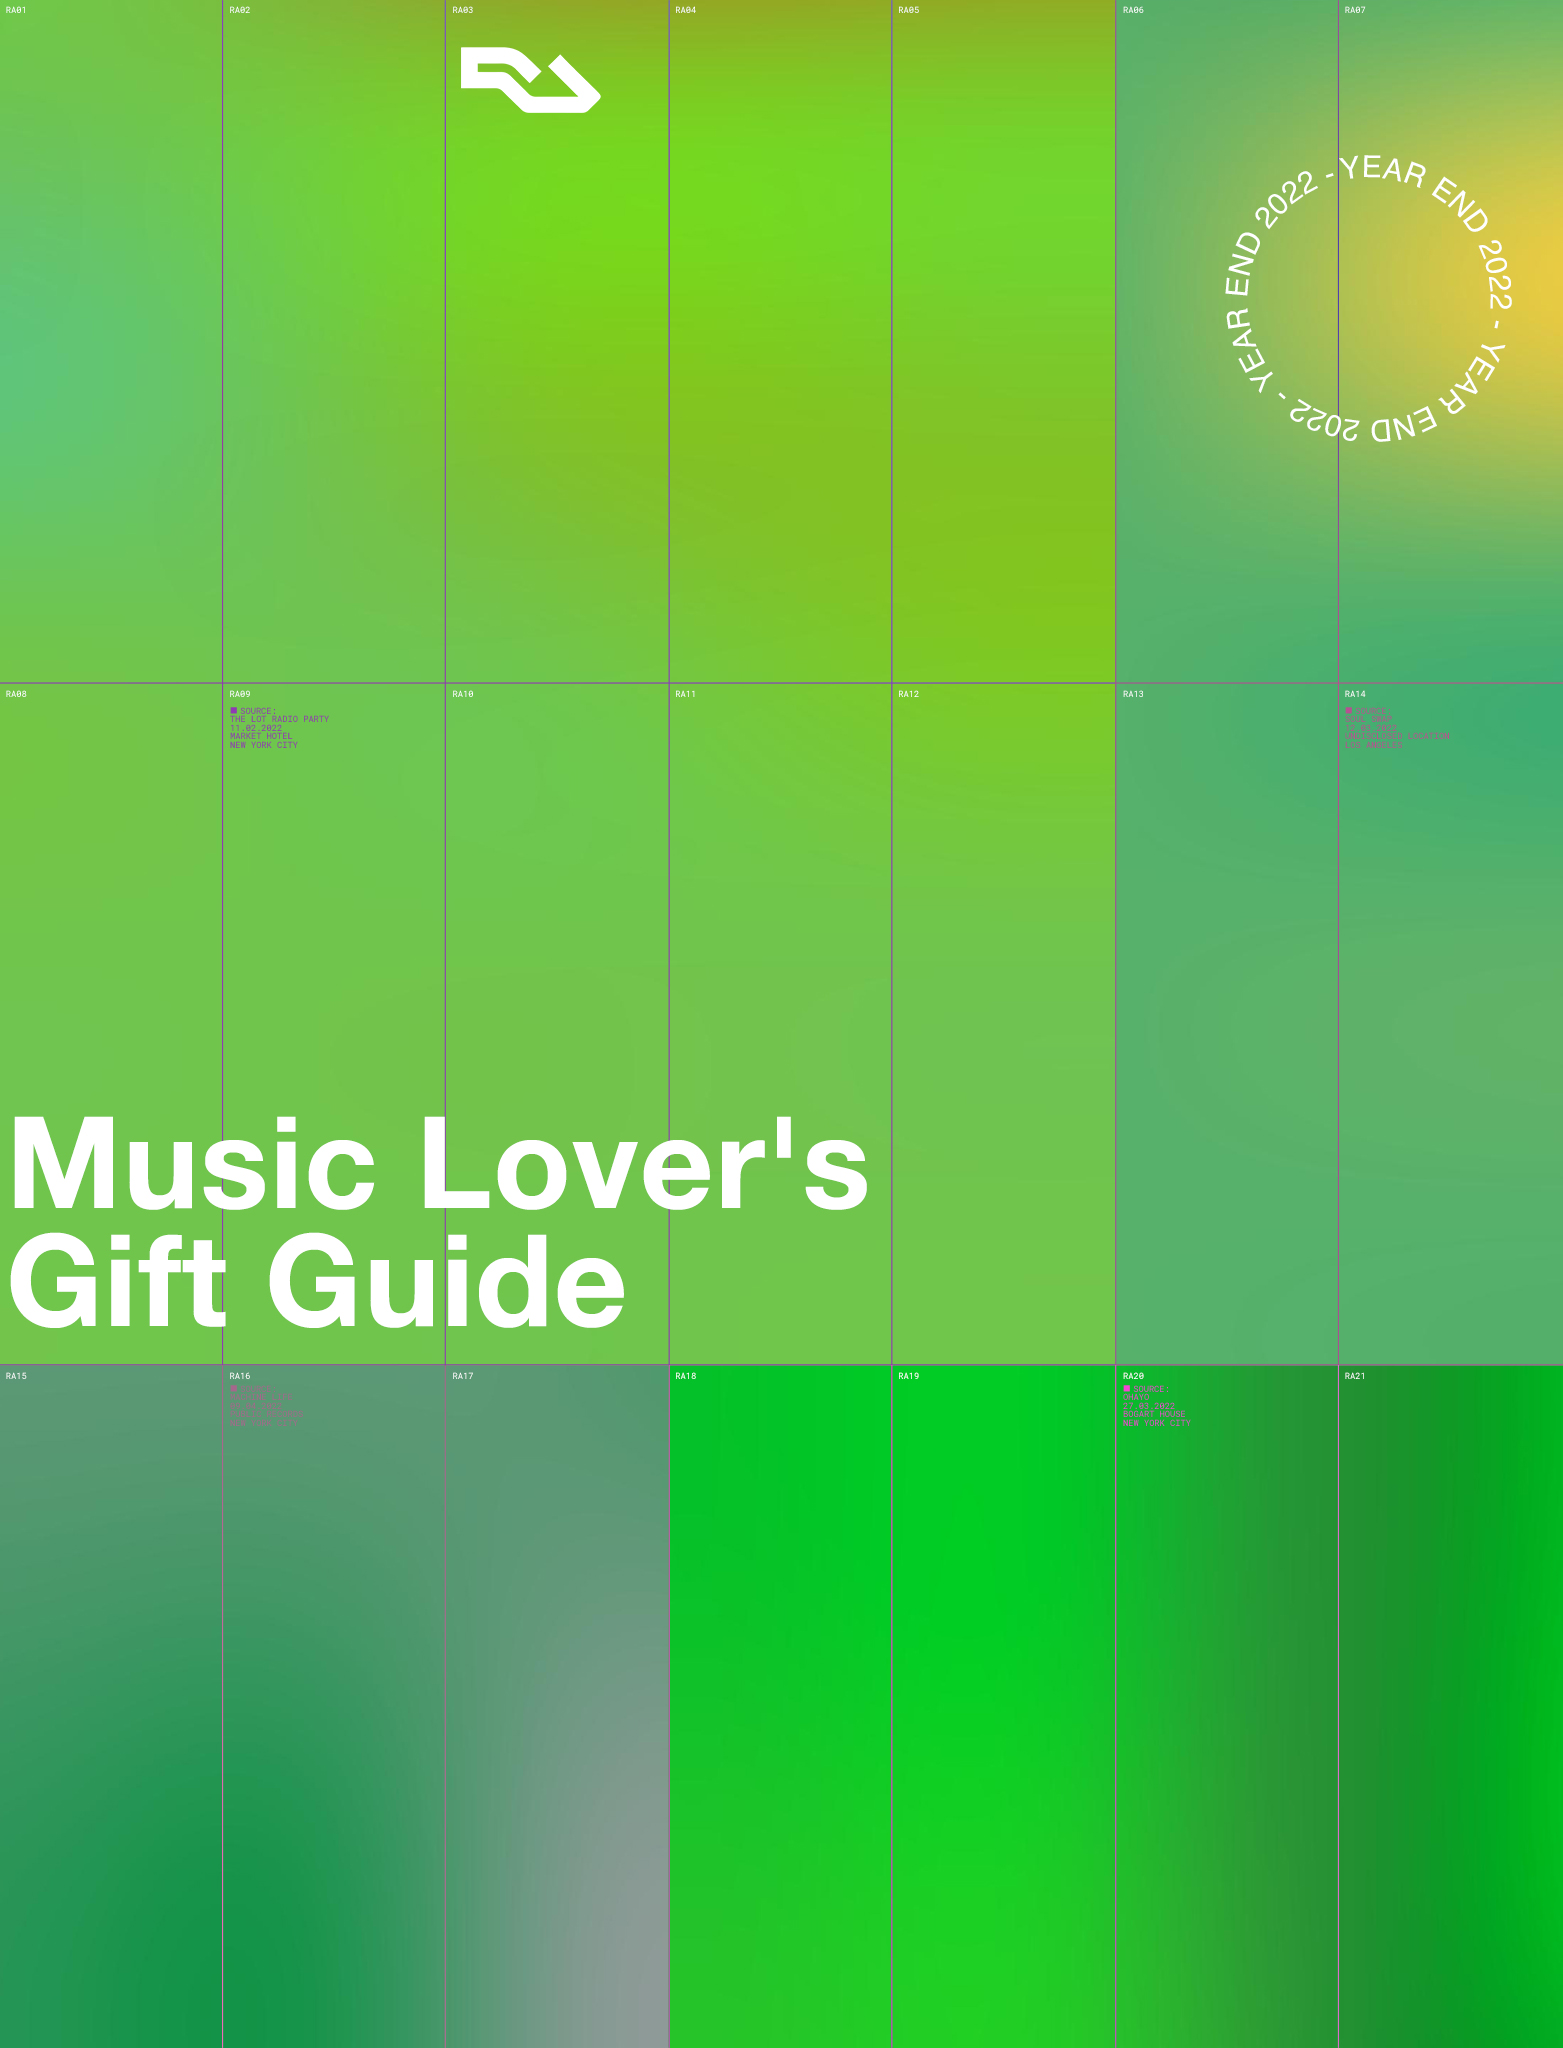 The 2022 Music Lover's Gift Guide